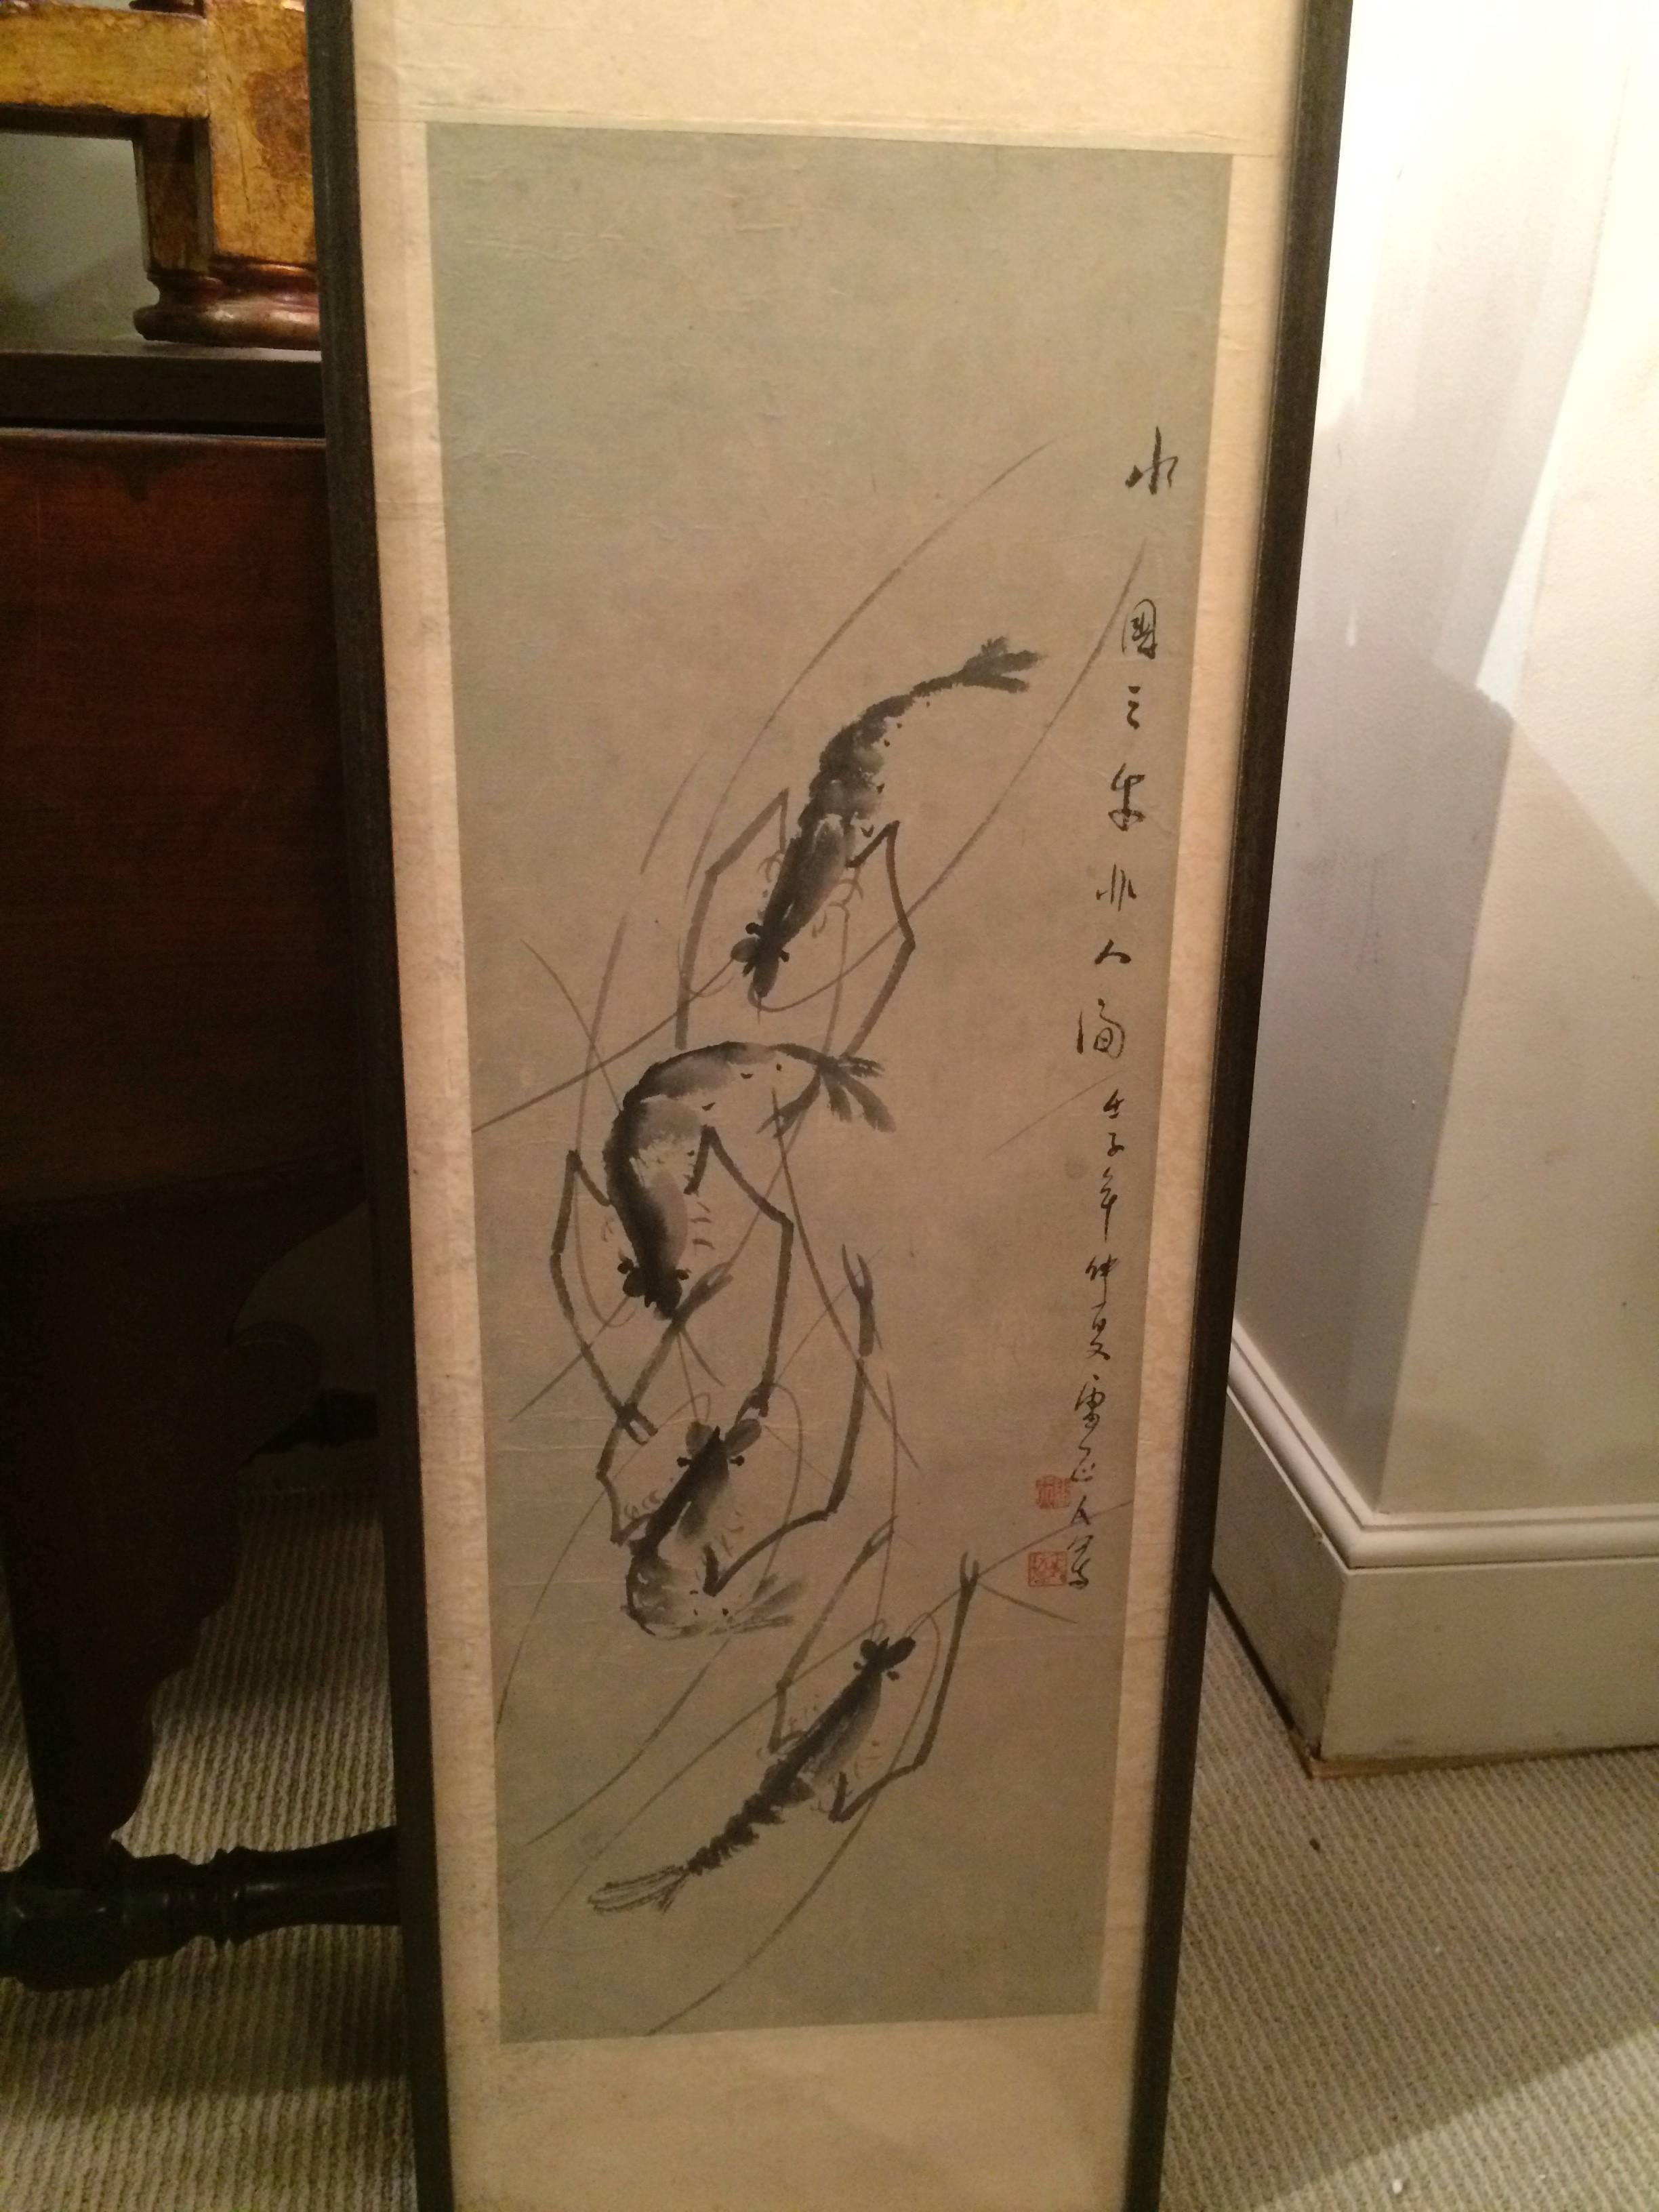 Charming 19th century Chinese scroll painting in ink of four shrimp with calligraphy column of characters down one side. Signed and stamped.